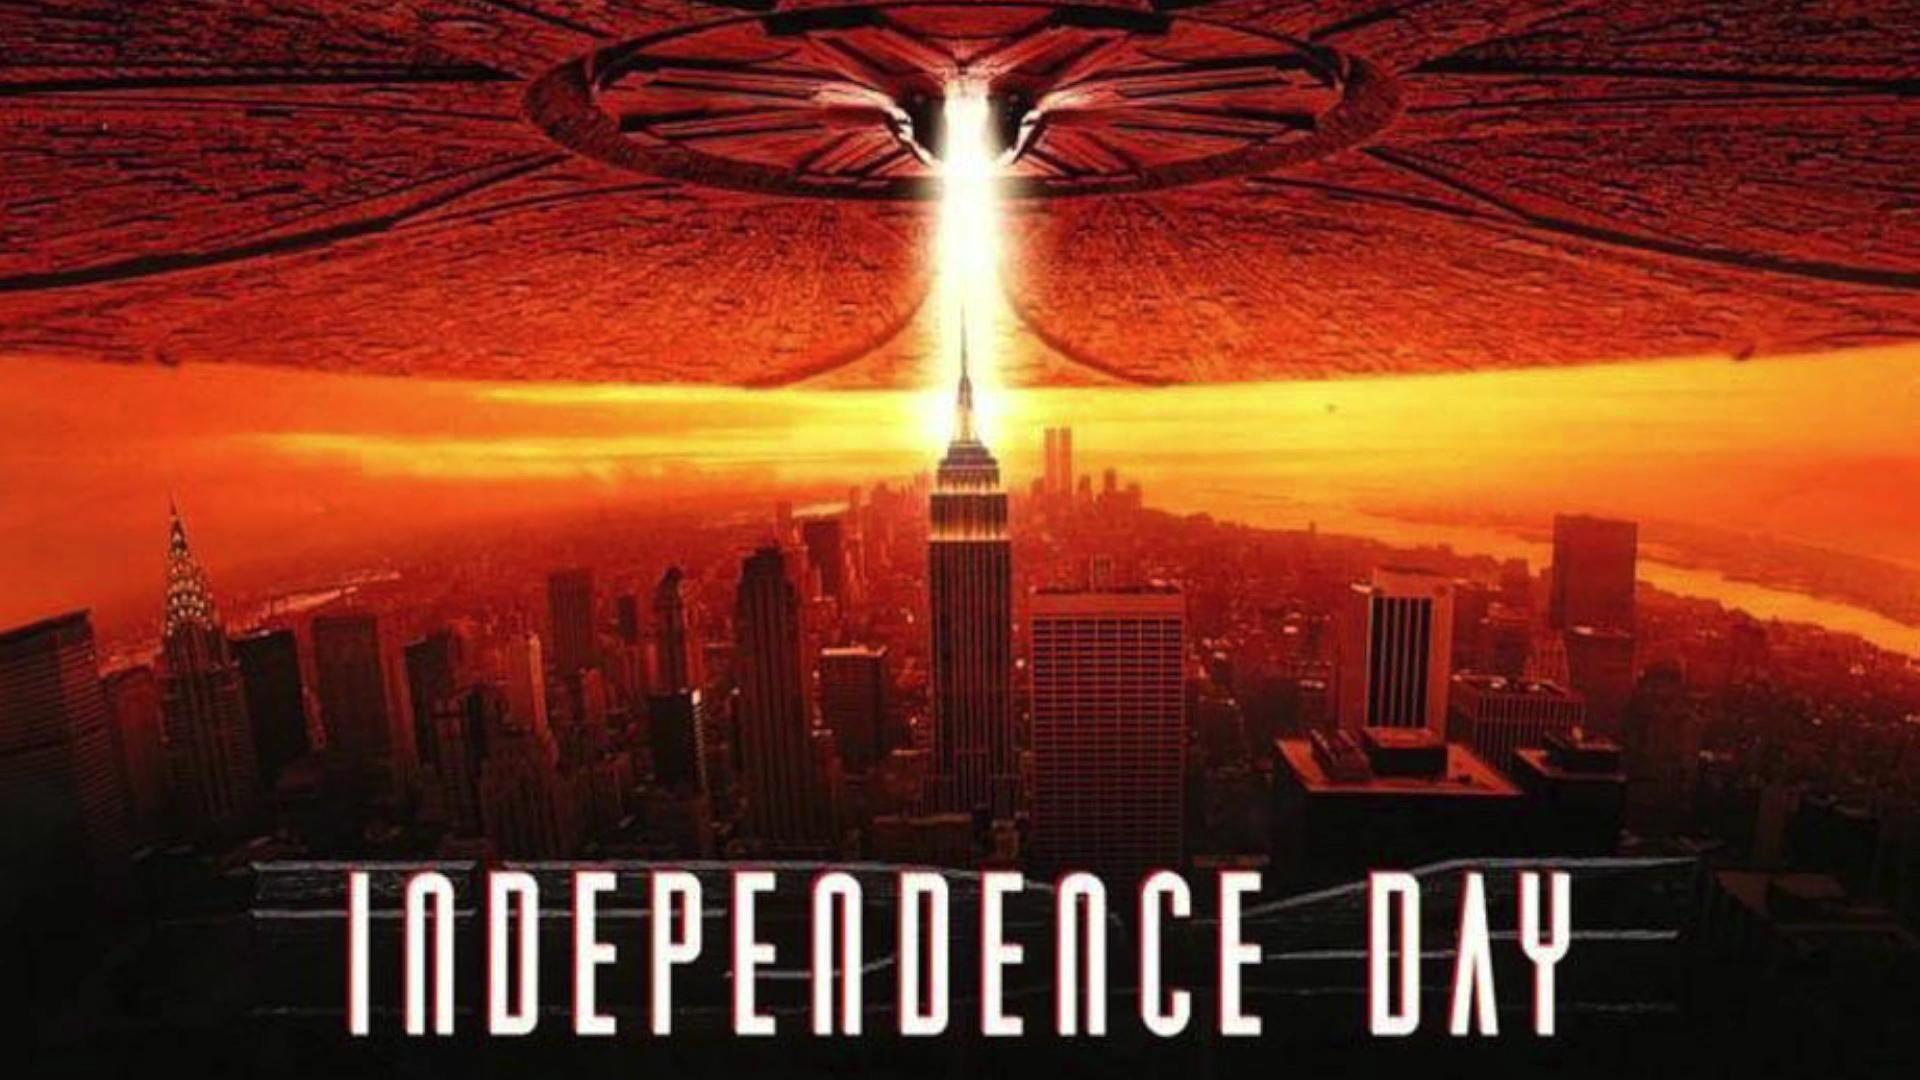 Independence Day Resurgence (2016) Movie Wallpaper HD. New HD